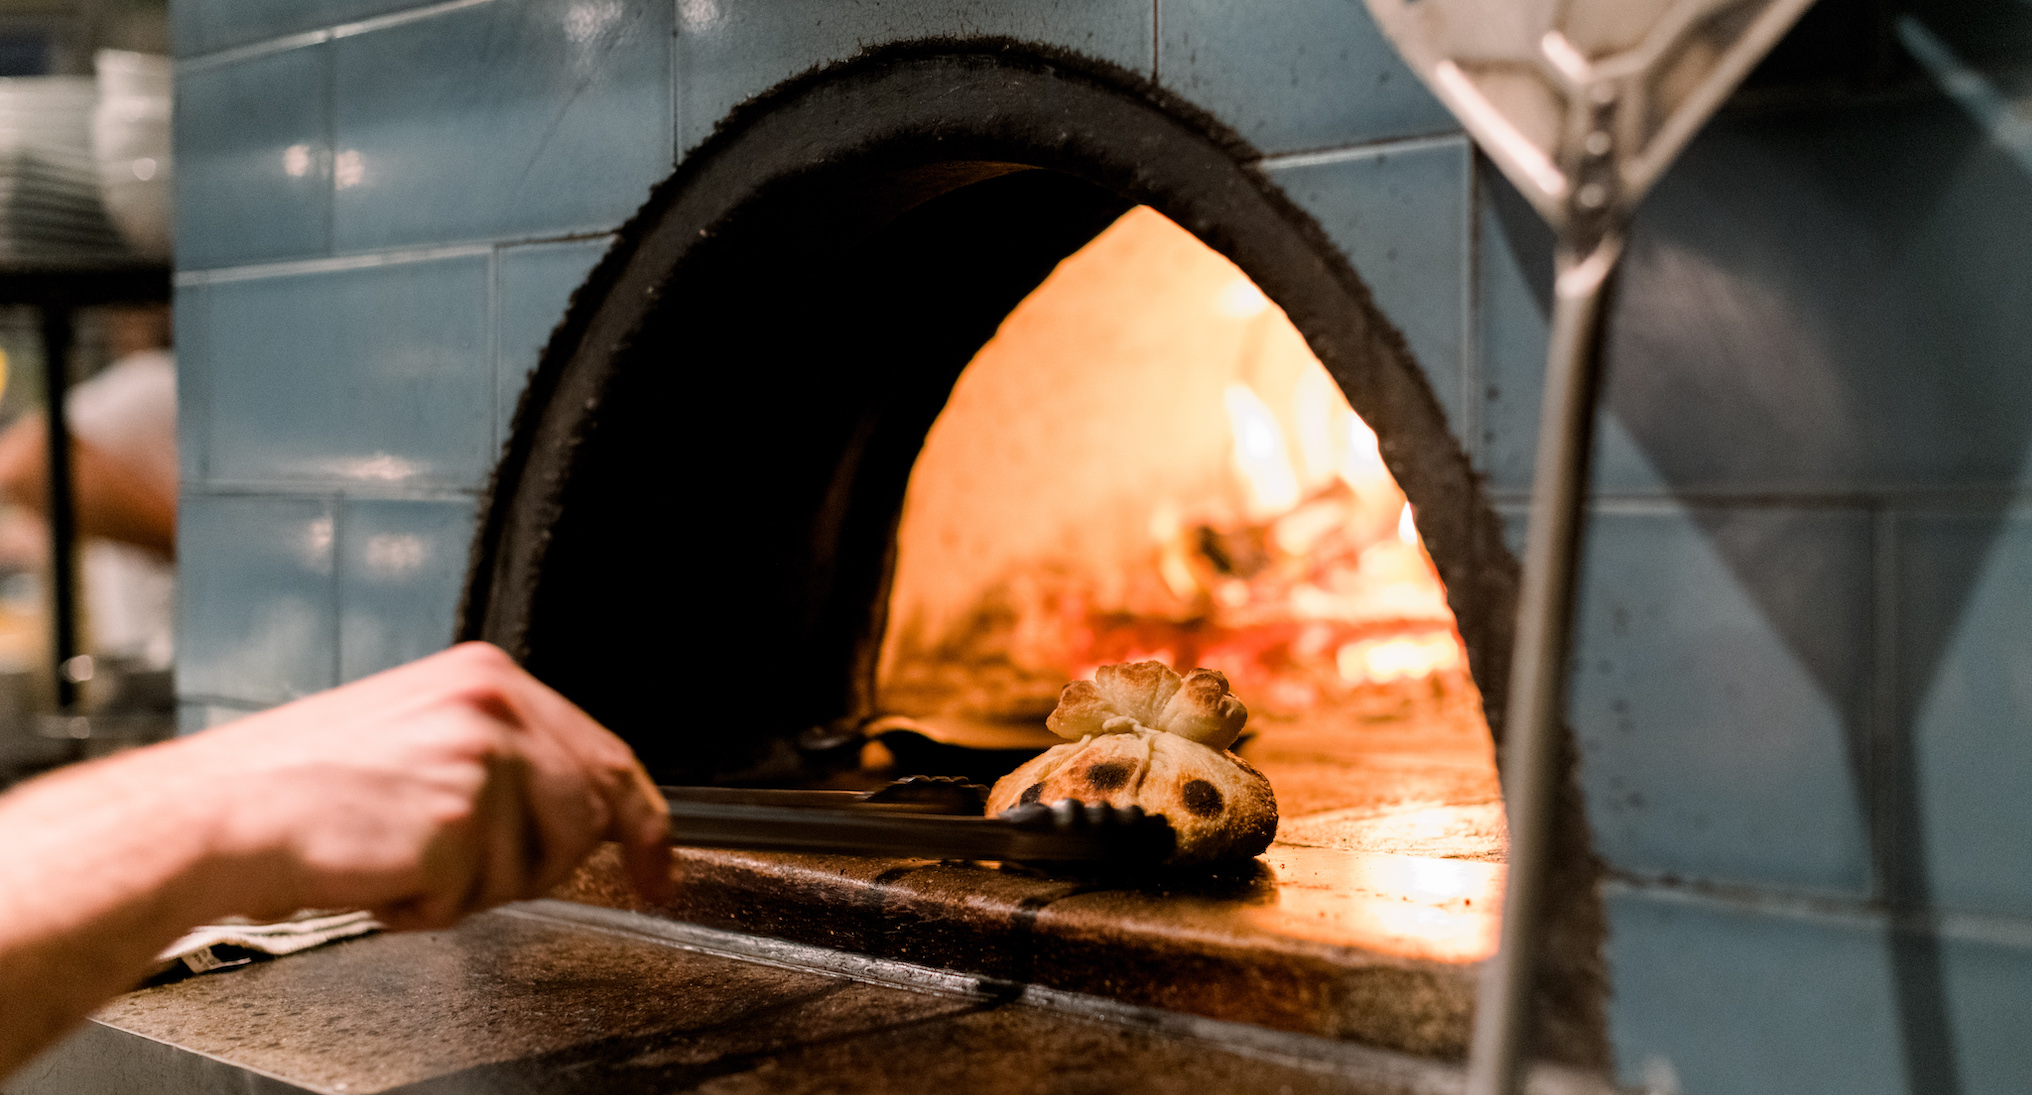 A hand moves a garlic knot in a wood fired oven